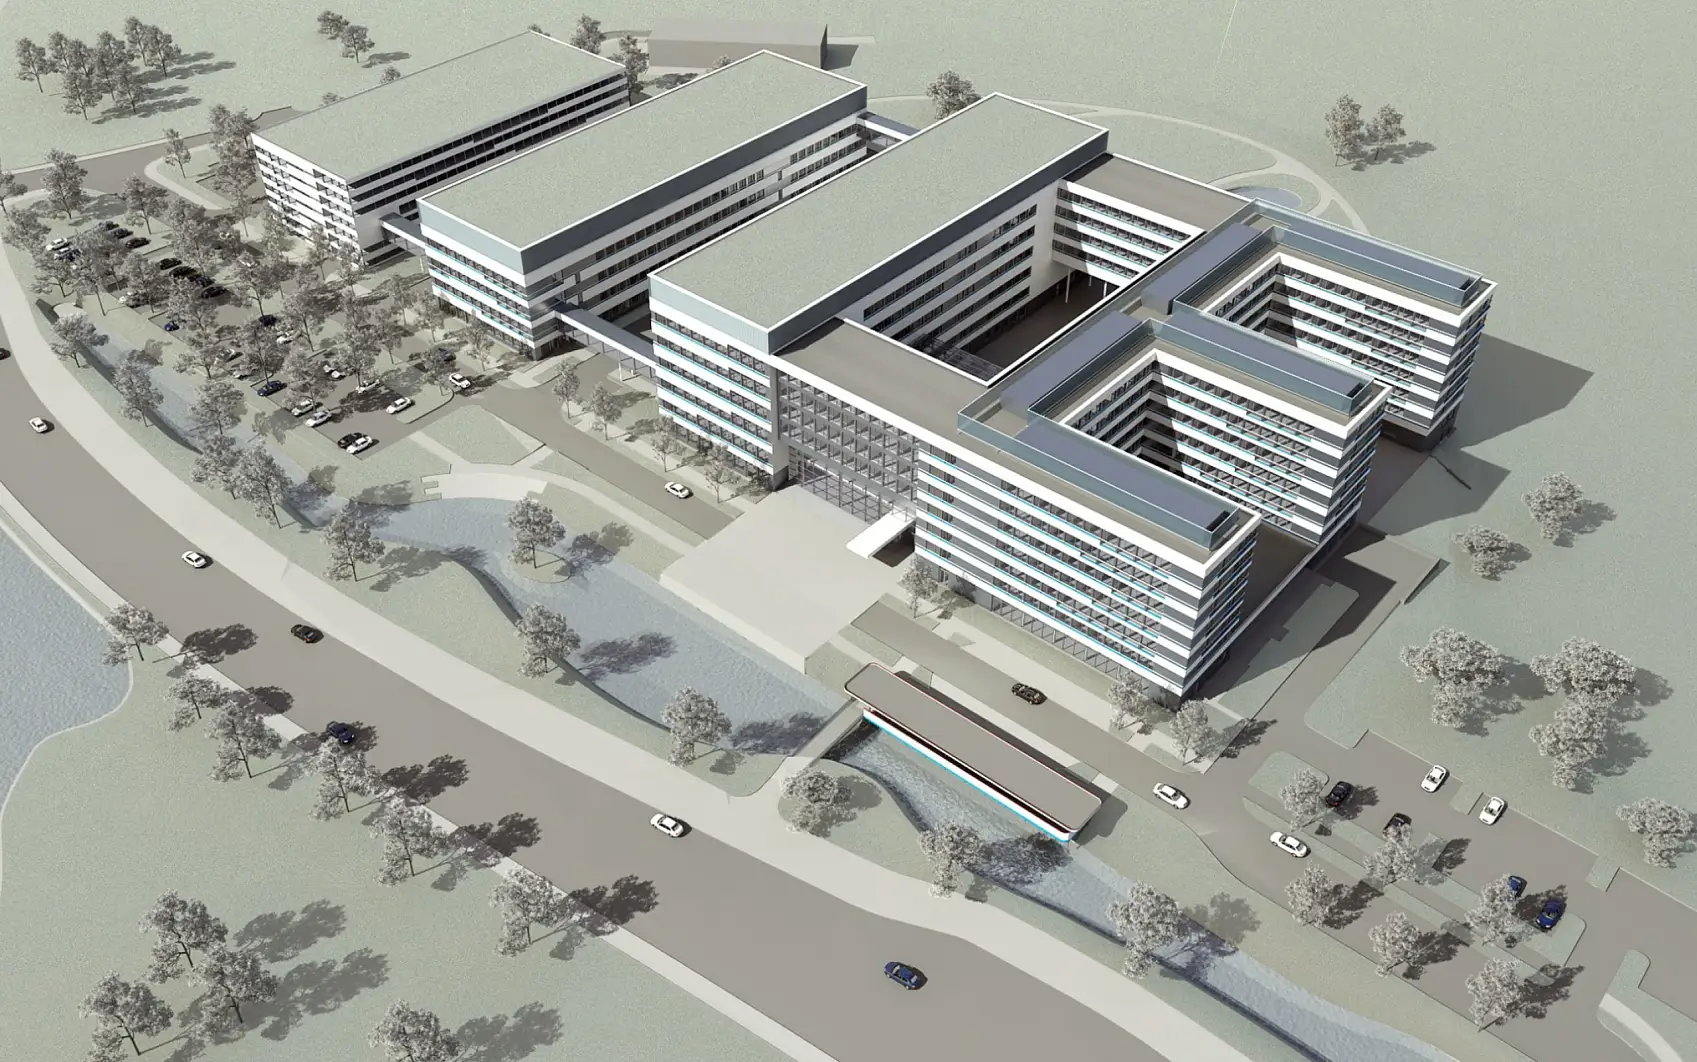 Technical illustration of the new tesa Campus